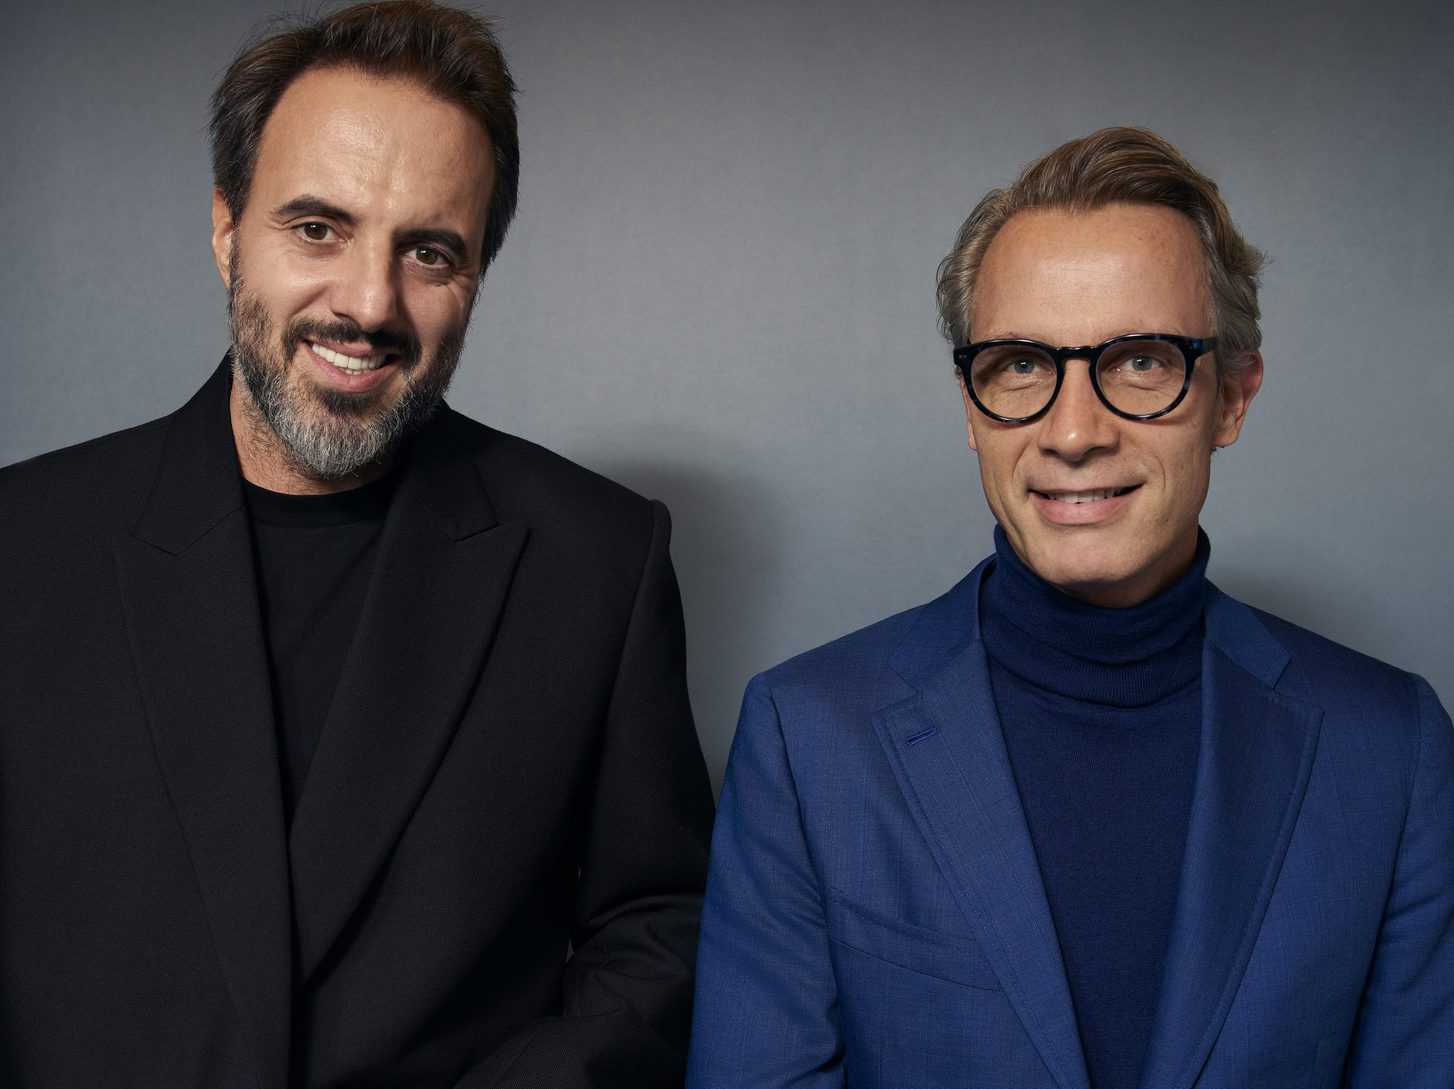 José Neves and Geoffrey van Raemdonck are part of a historic partnership between Farfetch and Neiman Marcus Group.